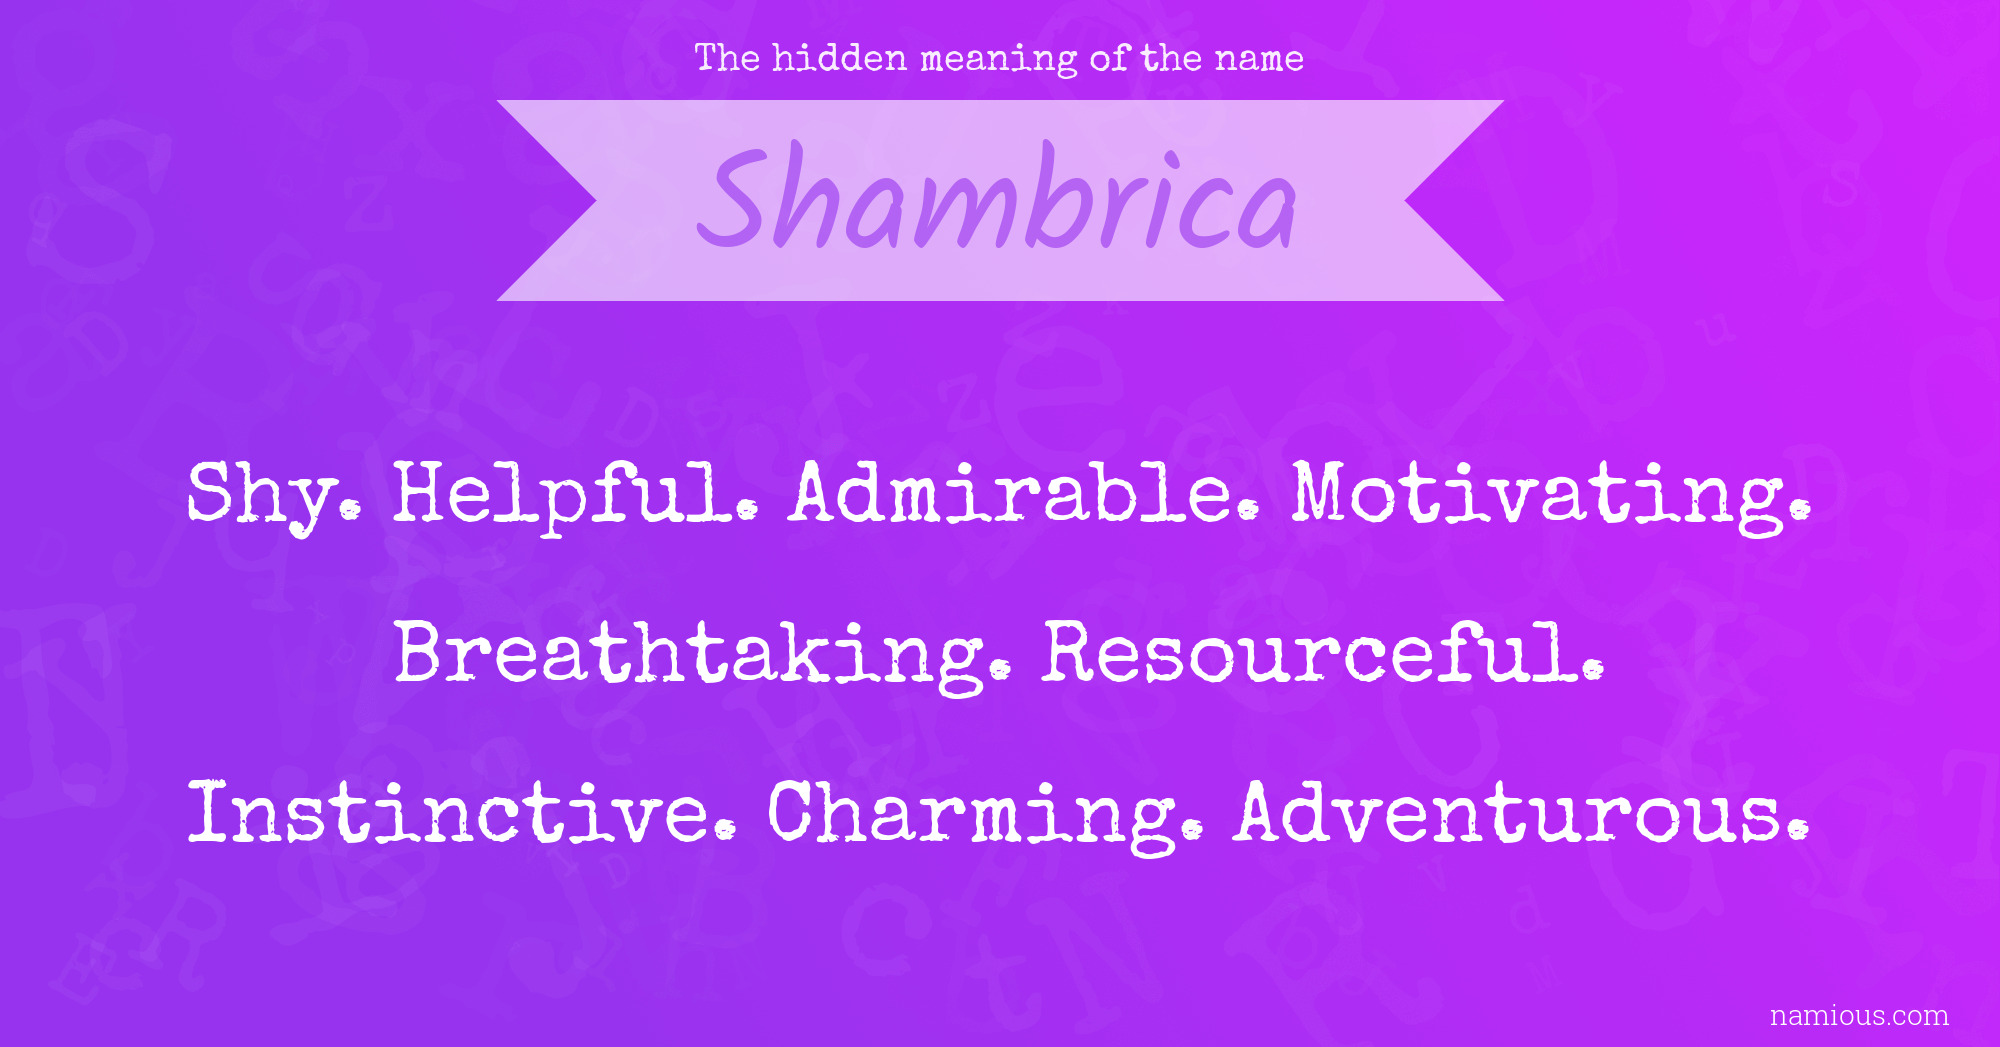 The hidden meaning of the name Shambrica